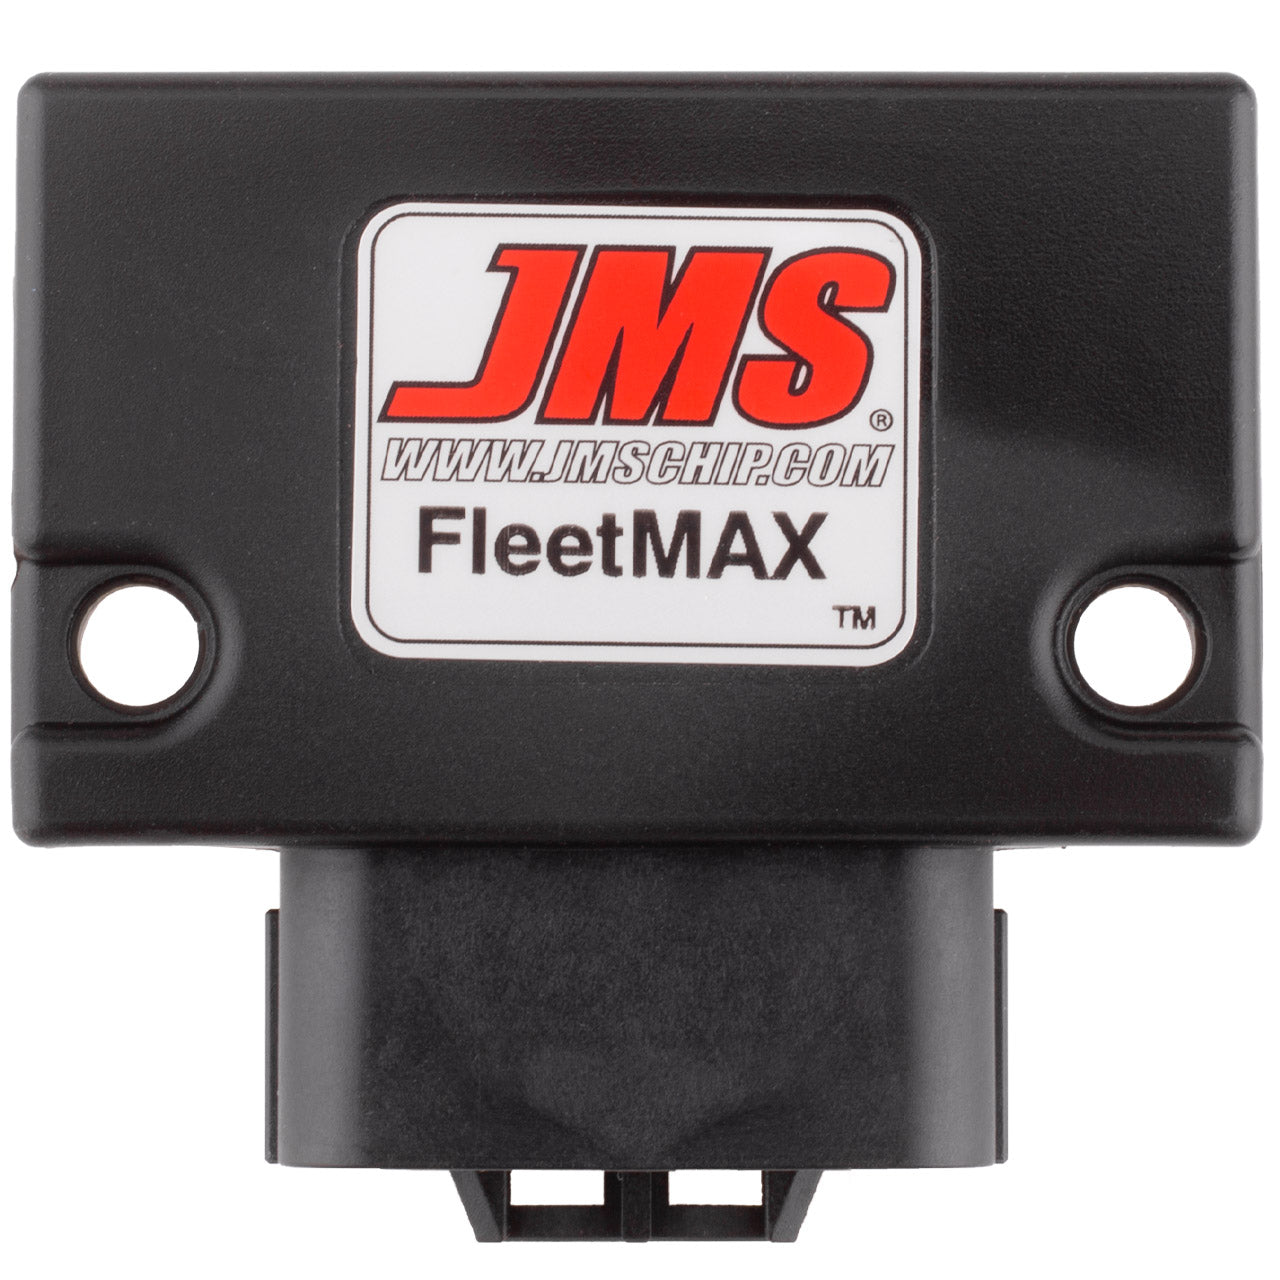 JMS FleetMAX Speed Control Device. Plug and Play for some 2008 - 2021 GM Cars with electronic throttle control FX71015GM